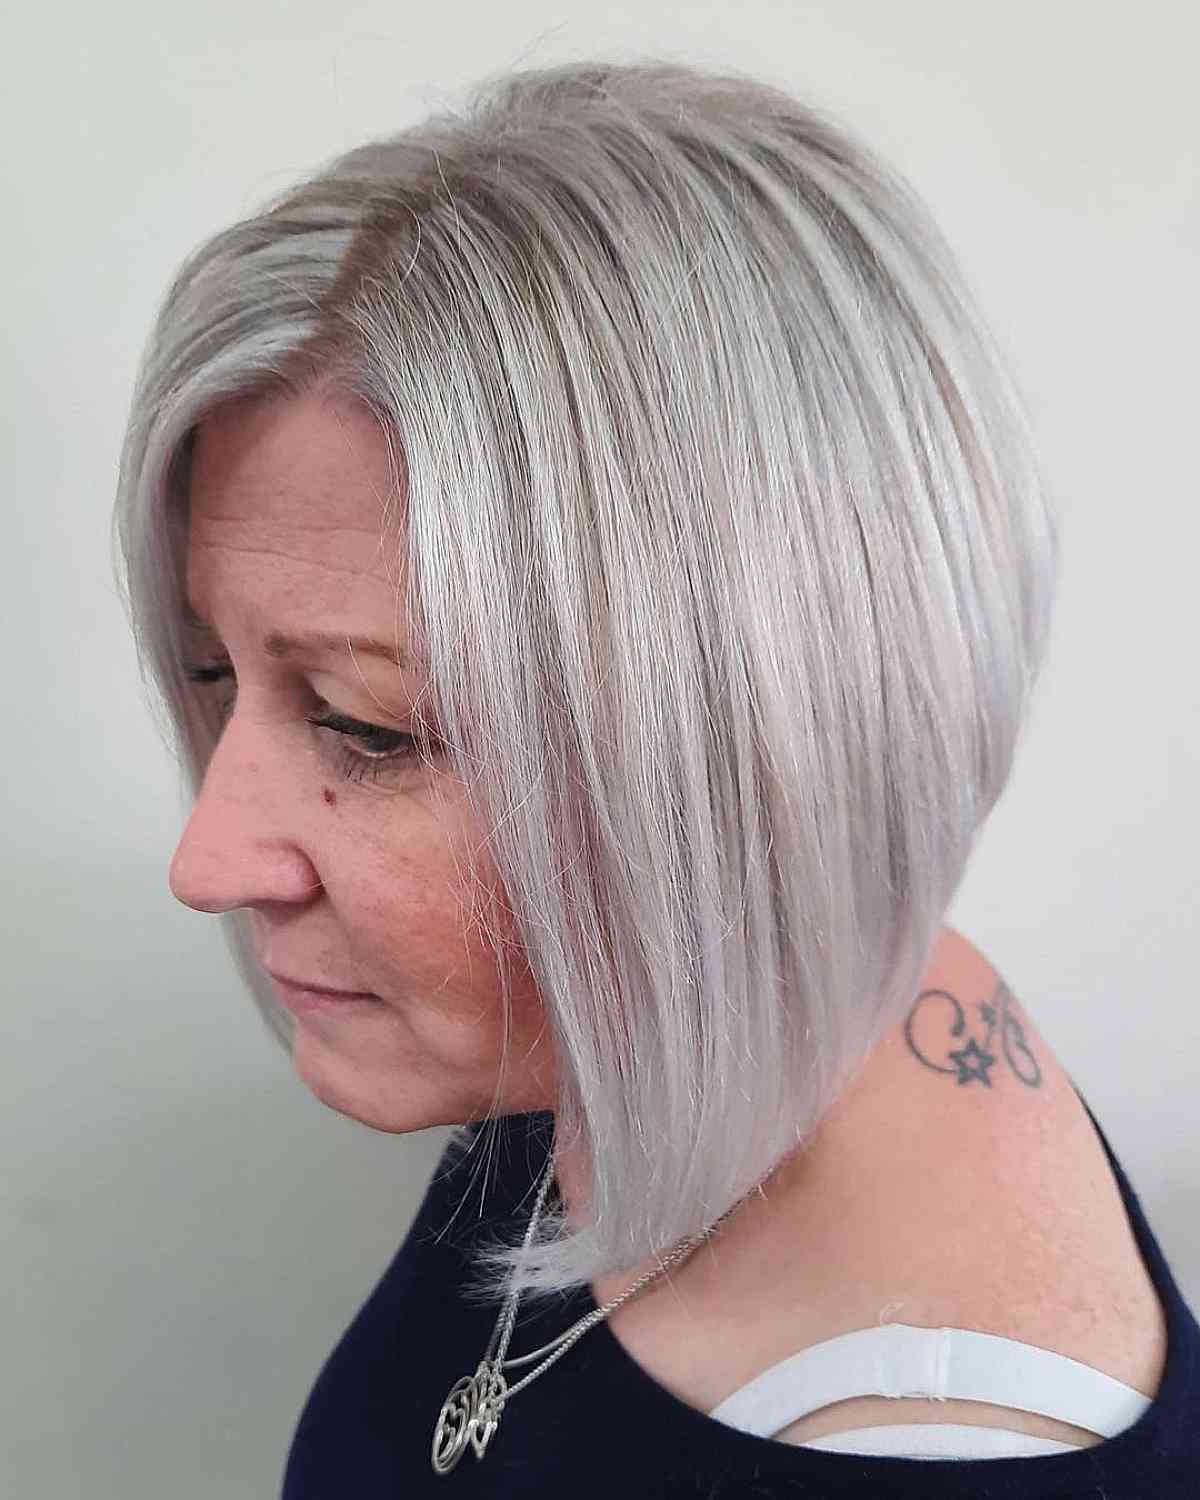 27 Youthful Hairstyles for Women Over 60 with Grey Hair